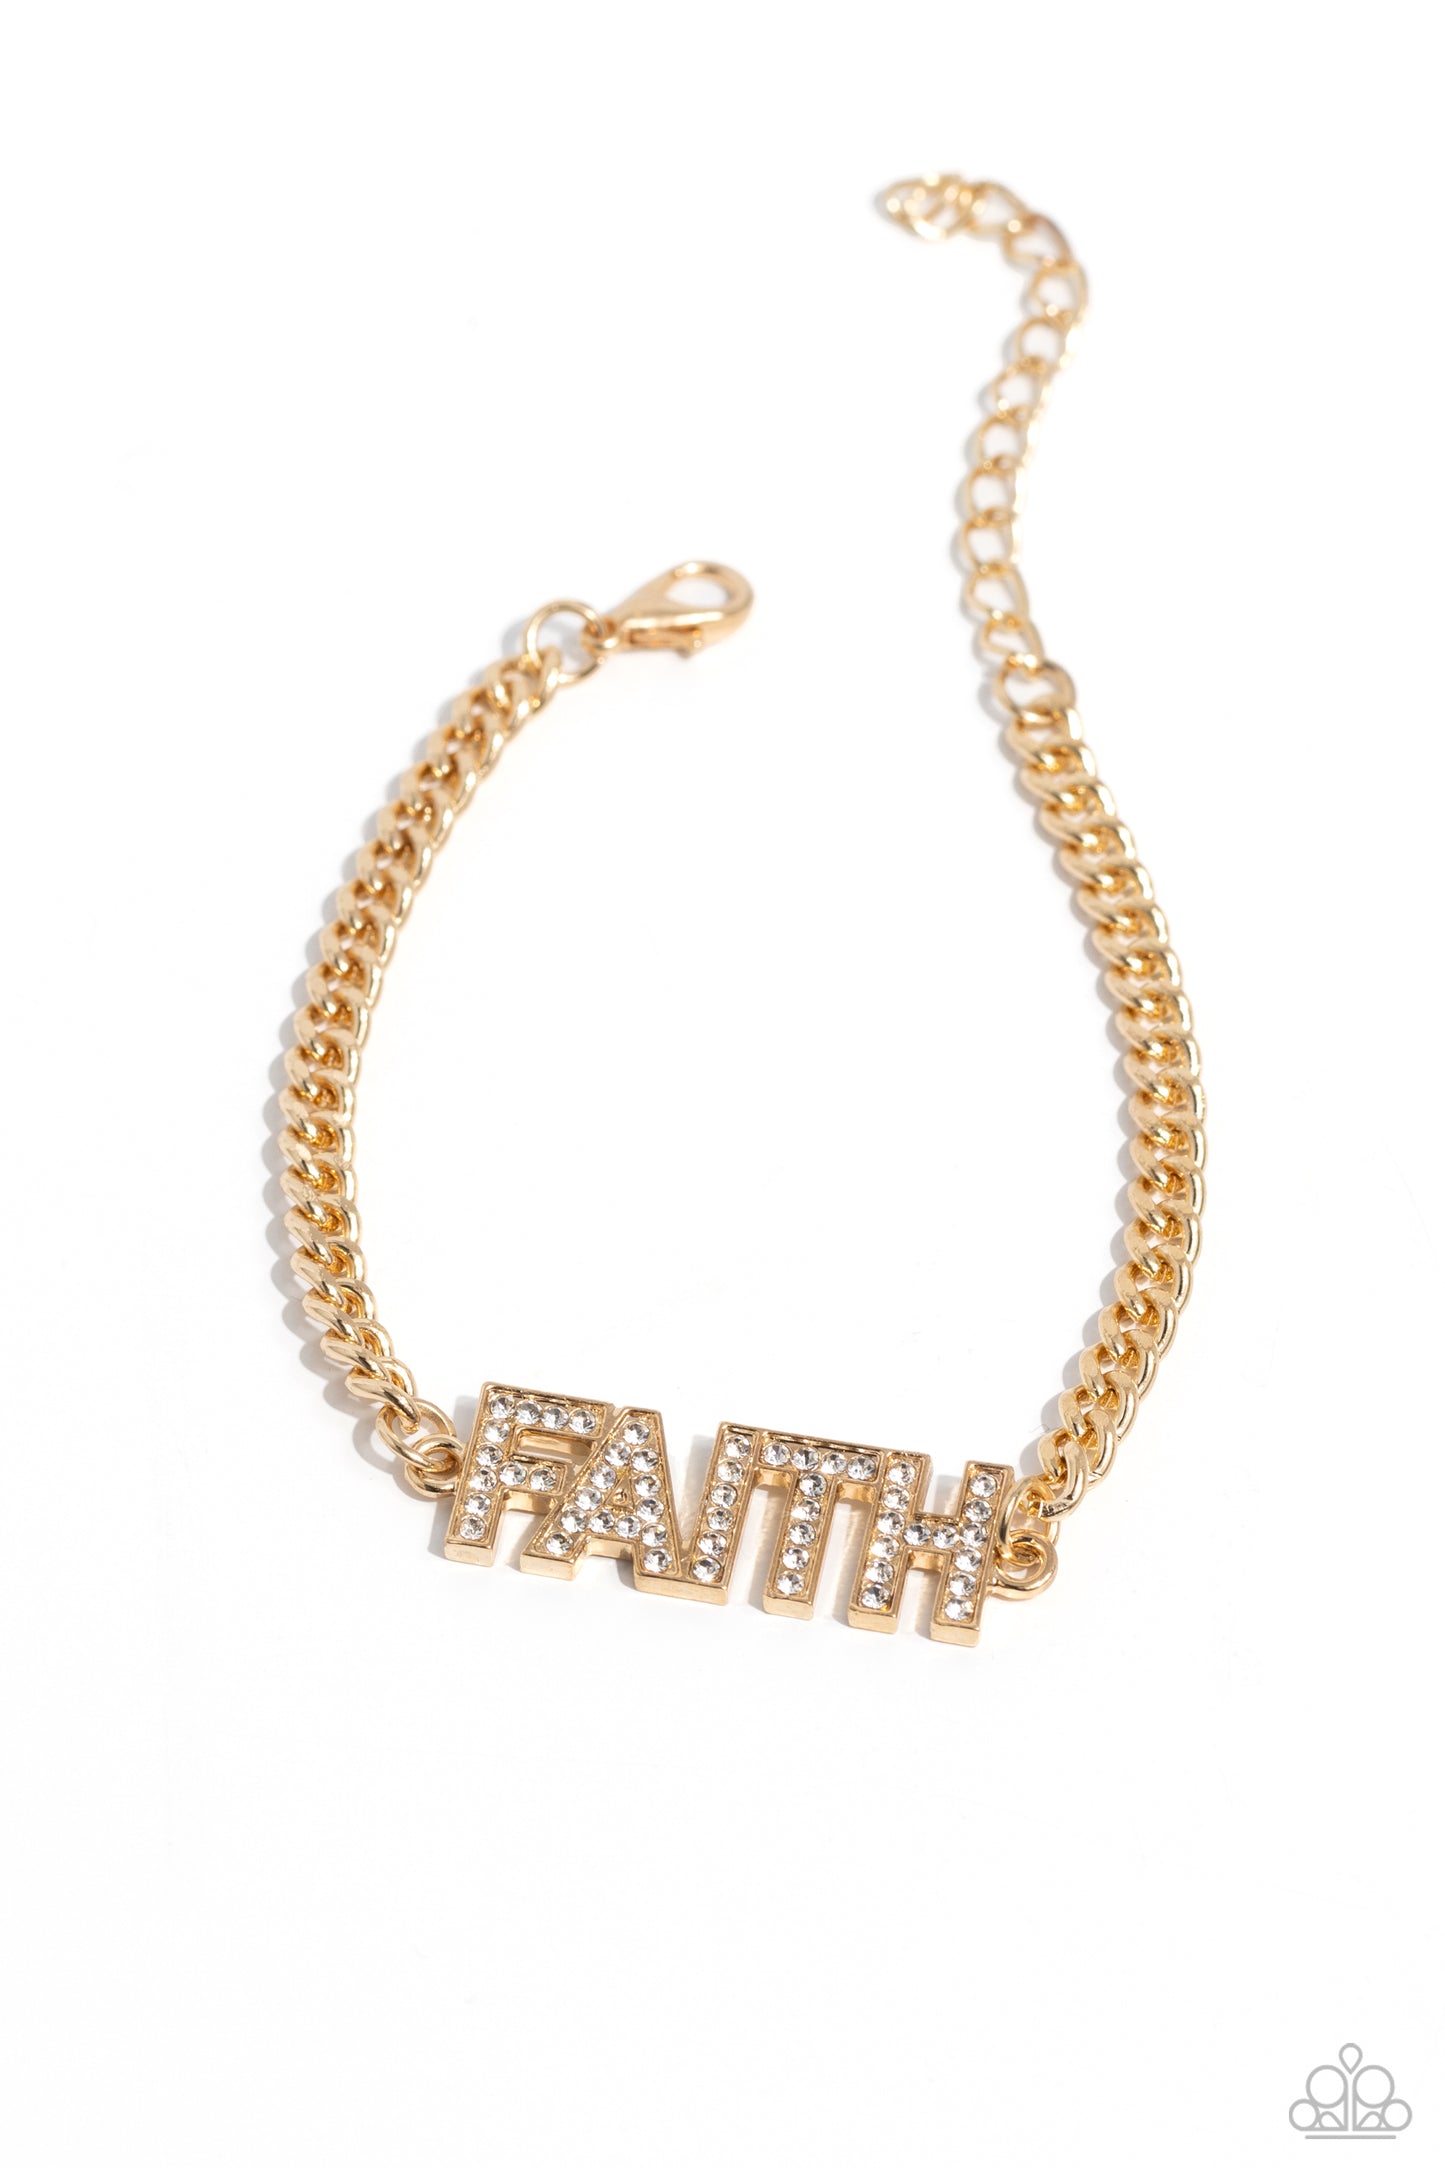 Faithful Finish Gold Inspirational Clasp Bracelet - Paparazzi Accessories  Encrusted in glassy white rhinestones, gold letter frames spell out the word "FAITH" along a classic gold chain for an inspirational finish around the wrist. Features an adjustable clasp closure.  Sold as one individual bracelet.  Sku:  P9WD-GDXX-193XX